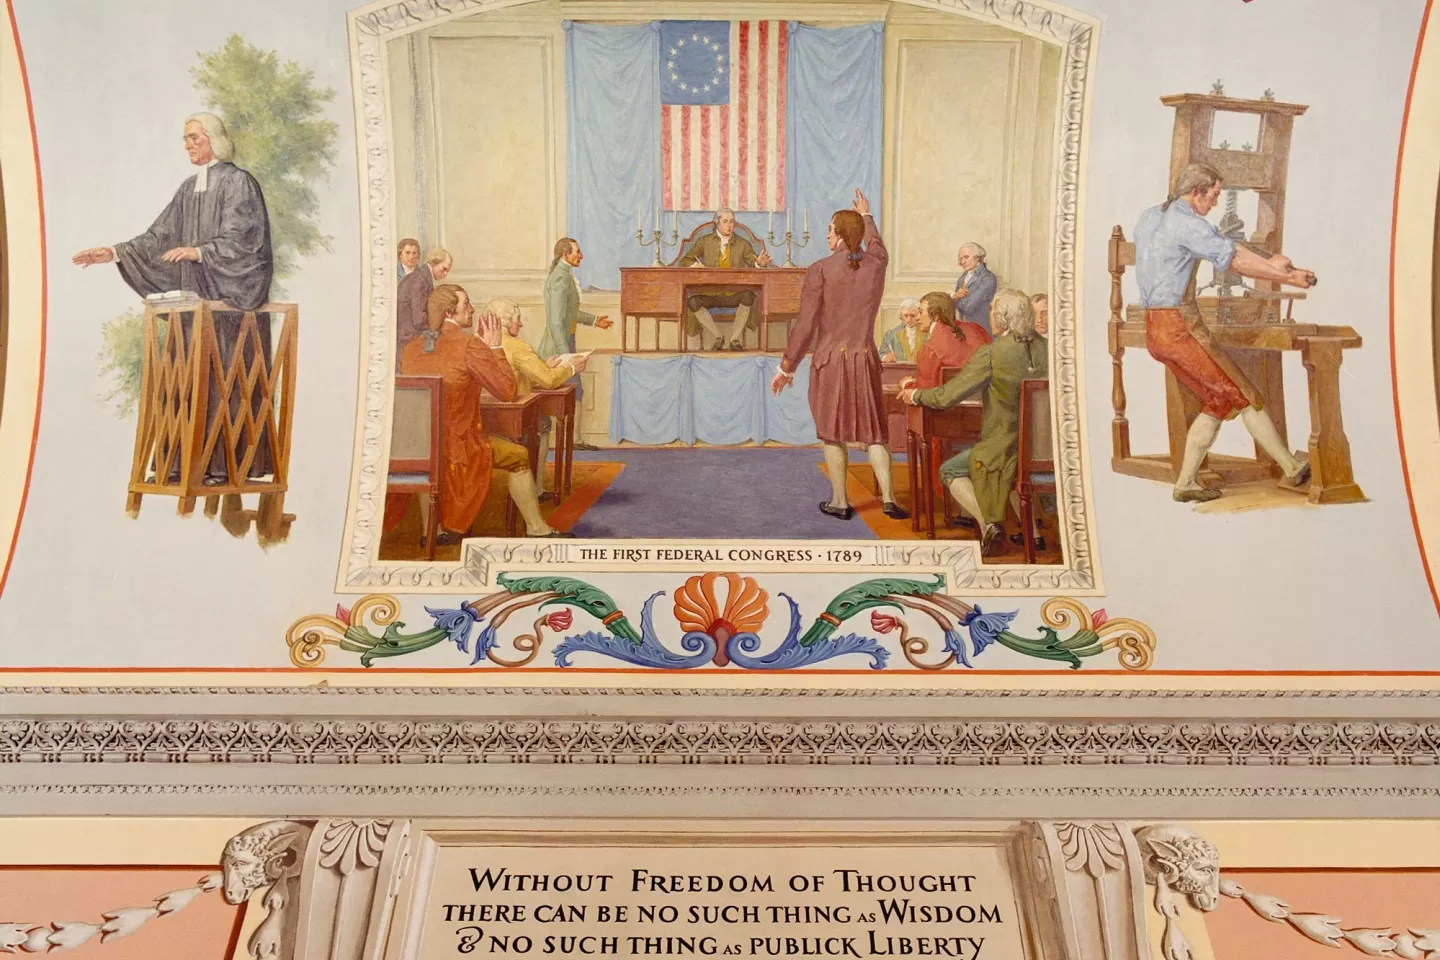 "The First Federal Congress, 1789" by Allyn Cox